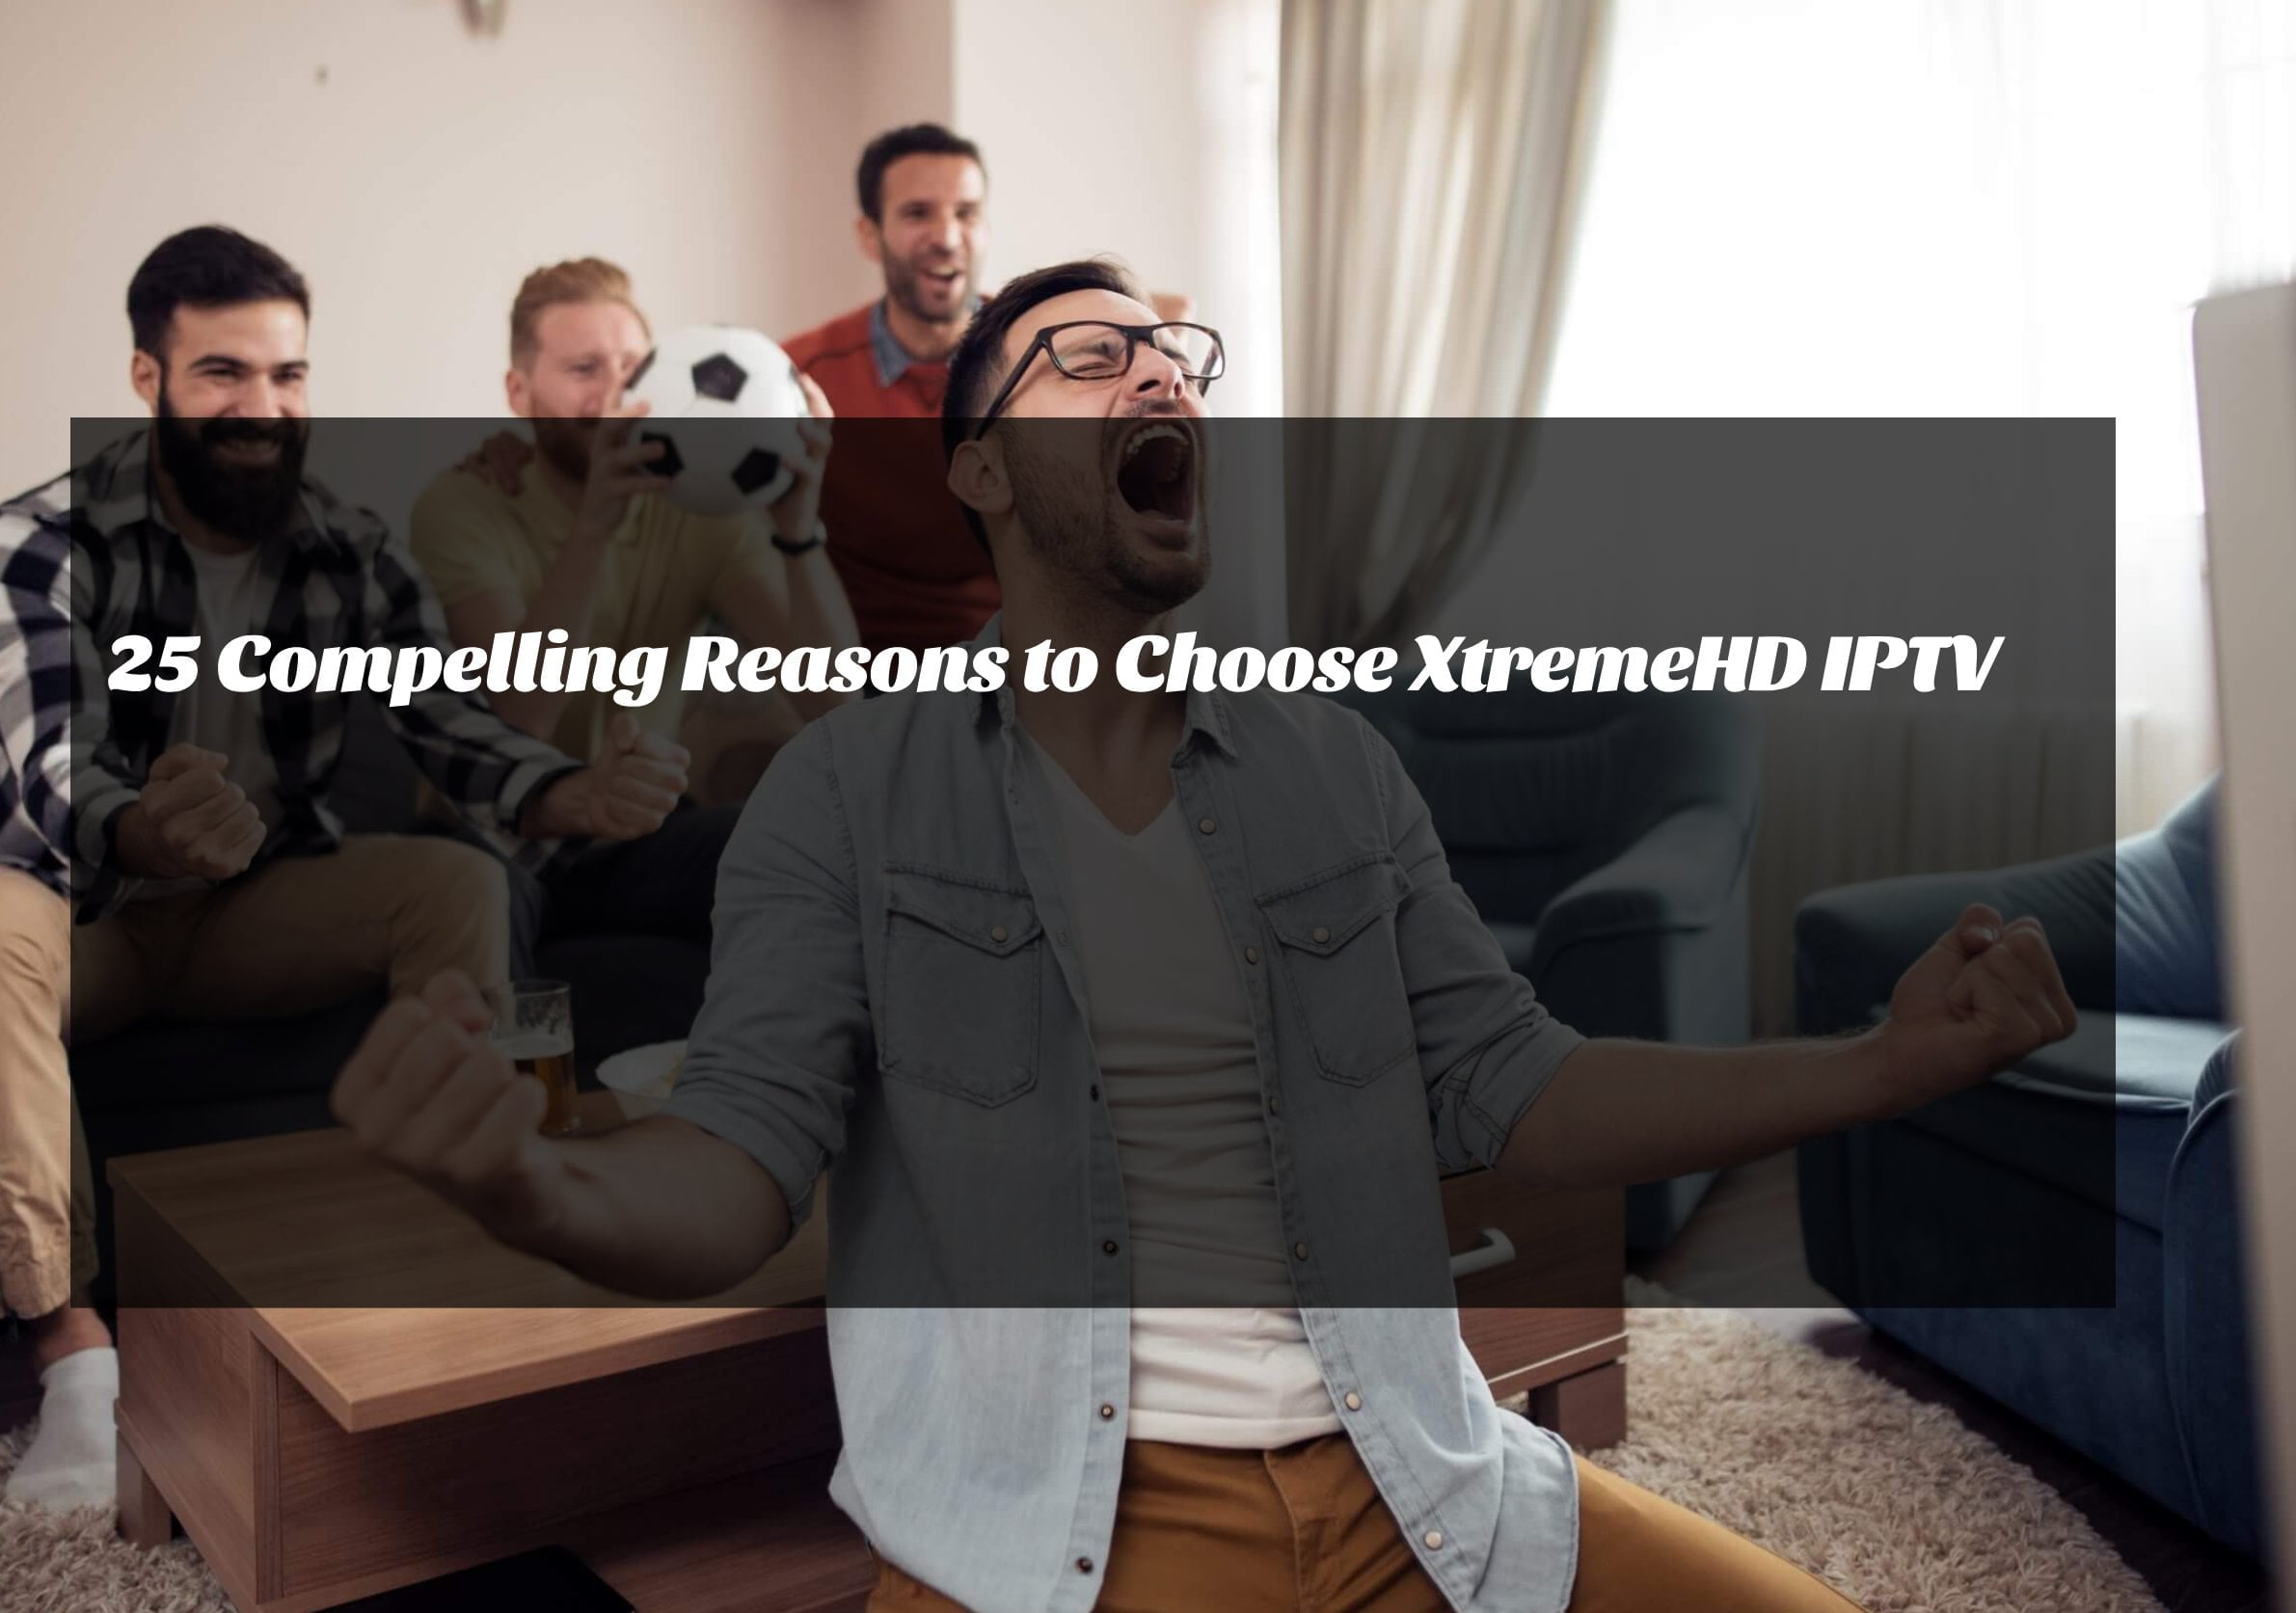 25 Compelling Reasons to Choose XtremeHD IPTV